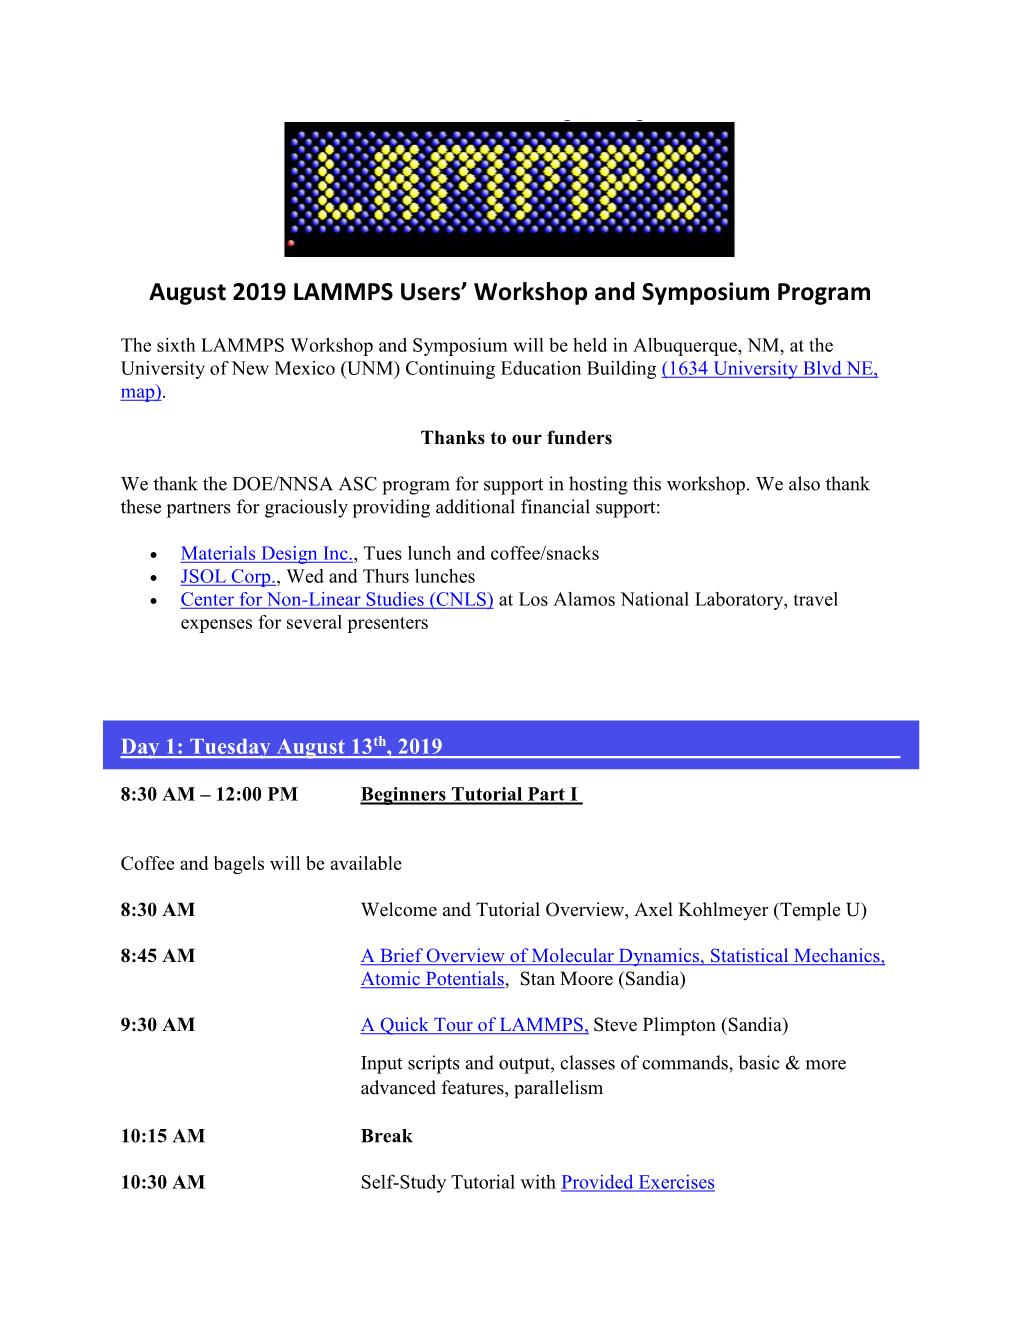 August 2019 LAMMPS Users' Workshop and Symposium Program